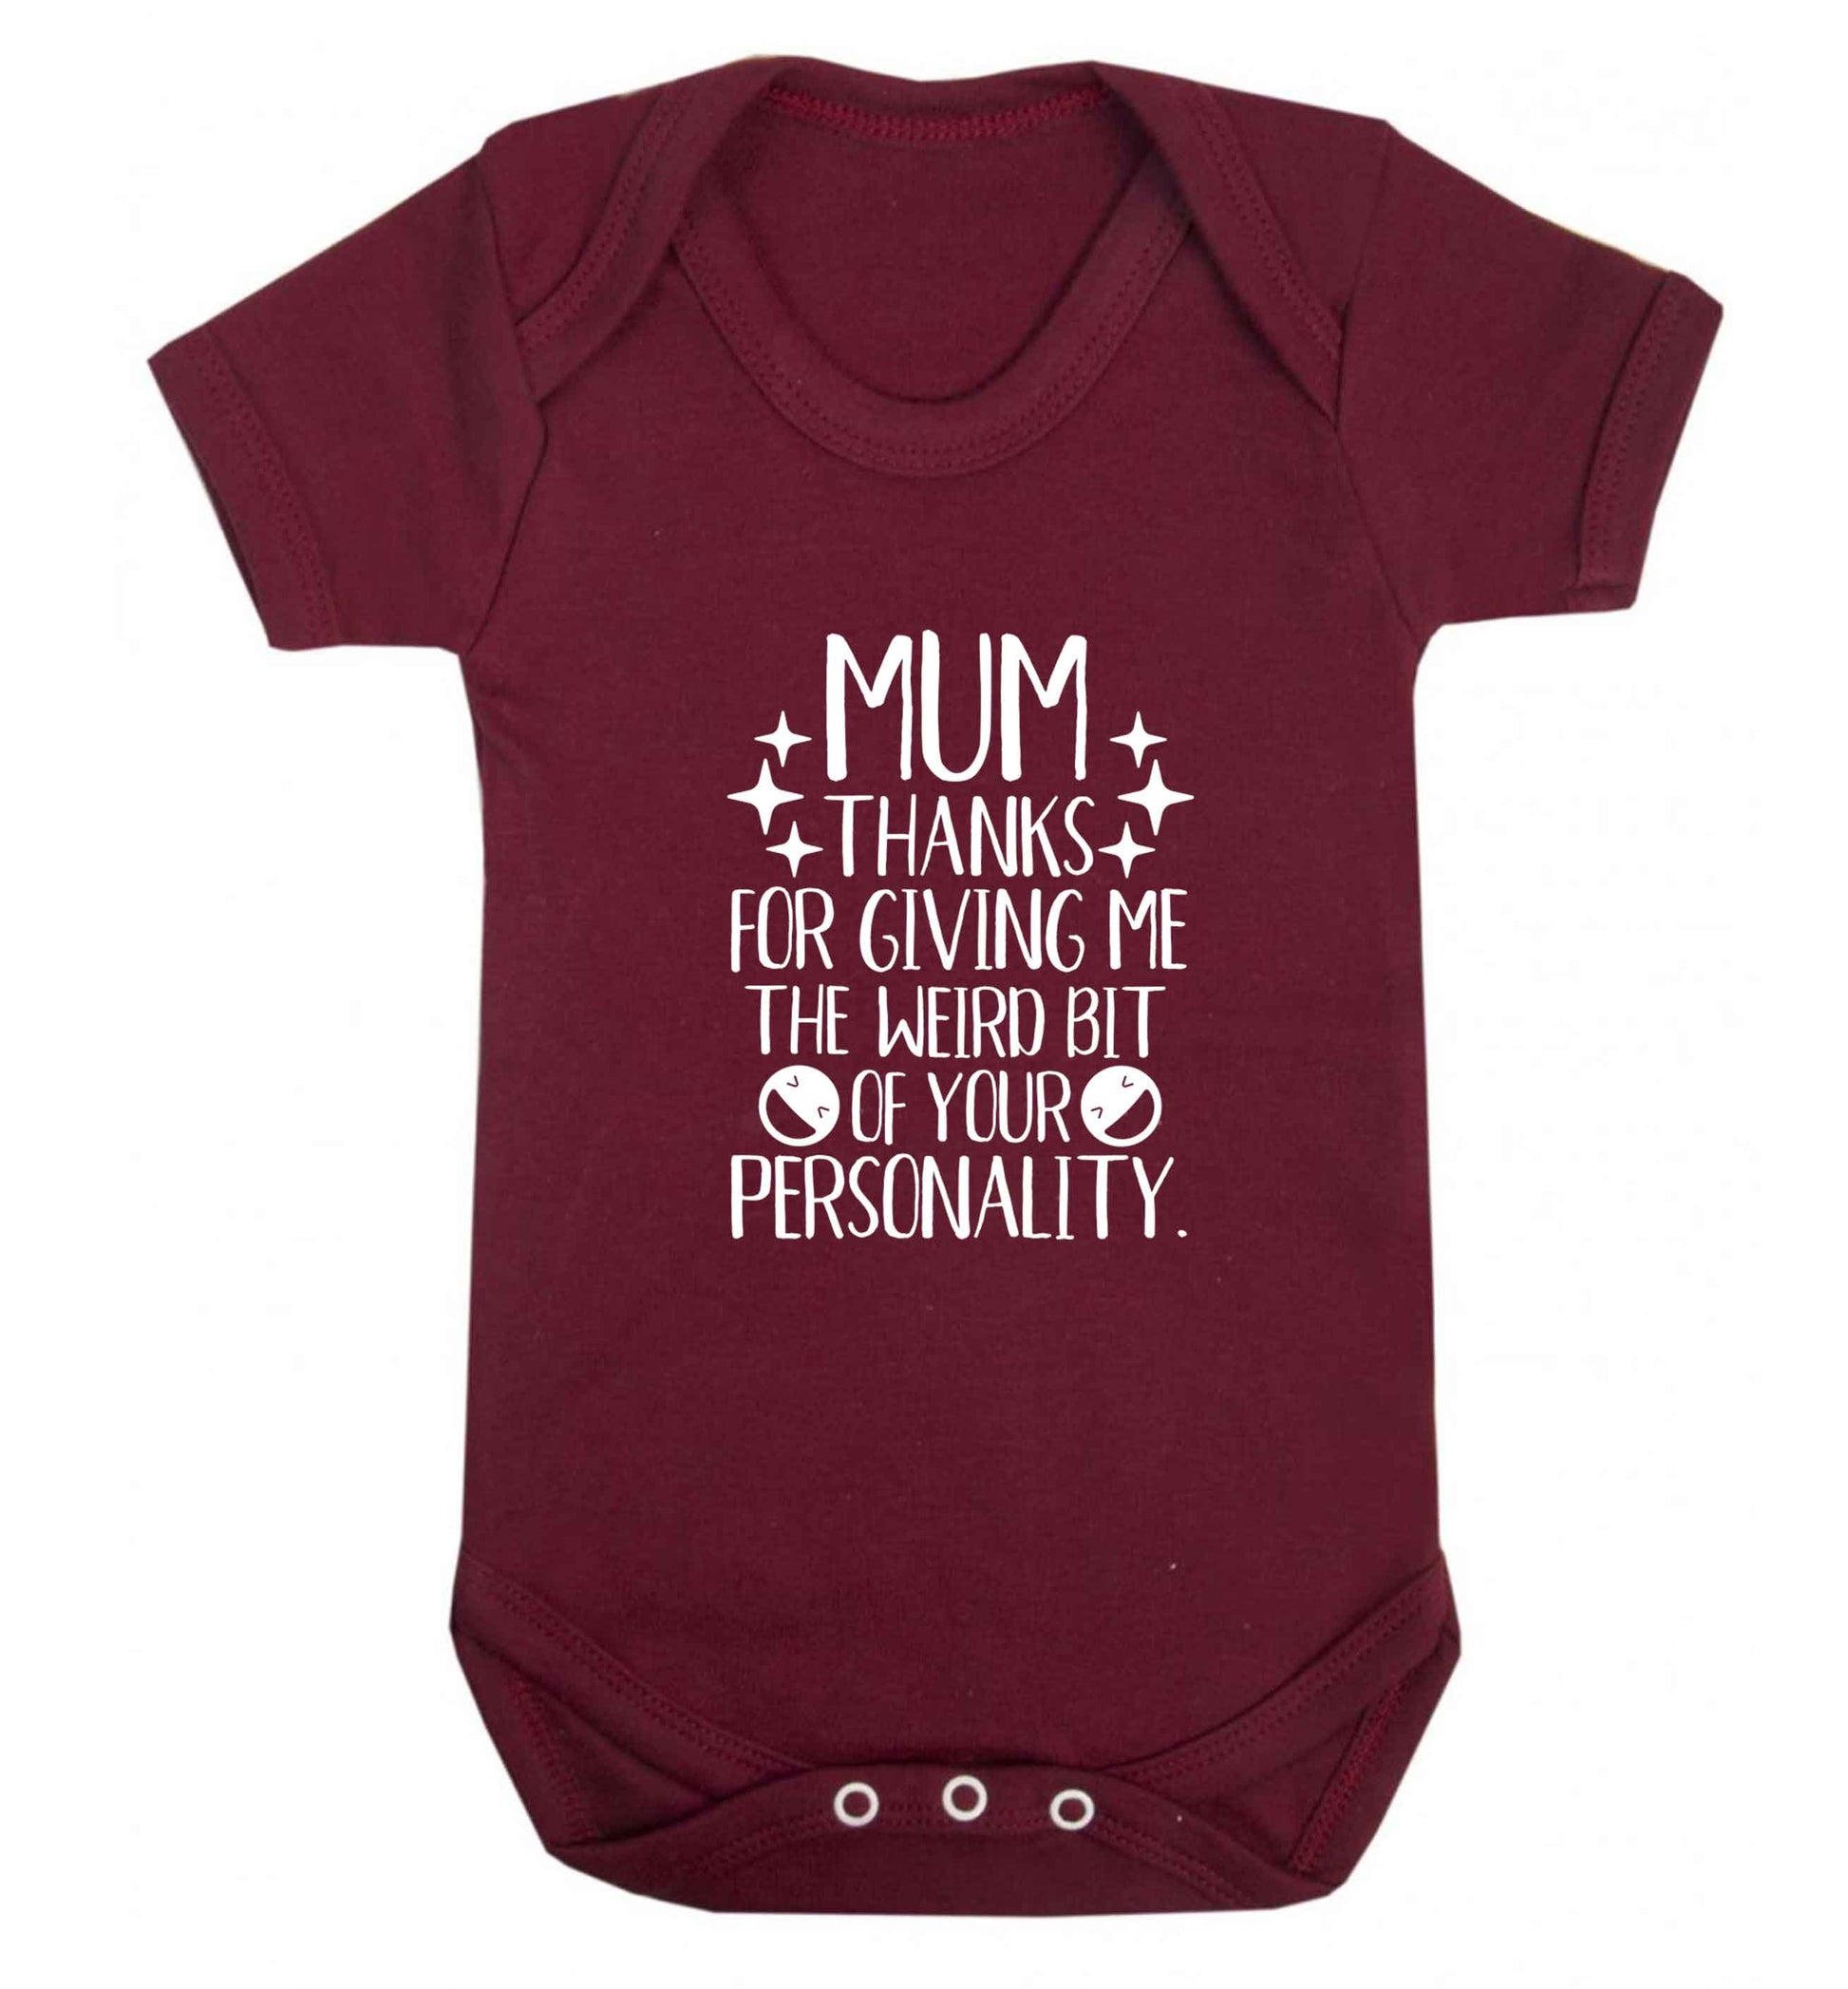 Mum thanks for giving me the weird bit of your personality baby vest maroon 18-24 months